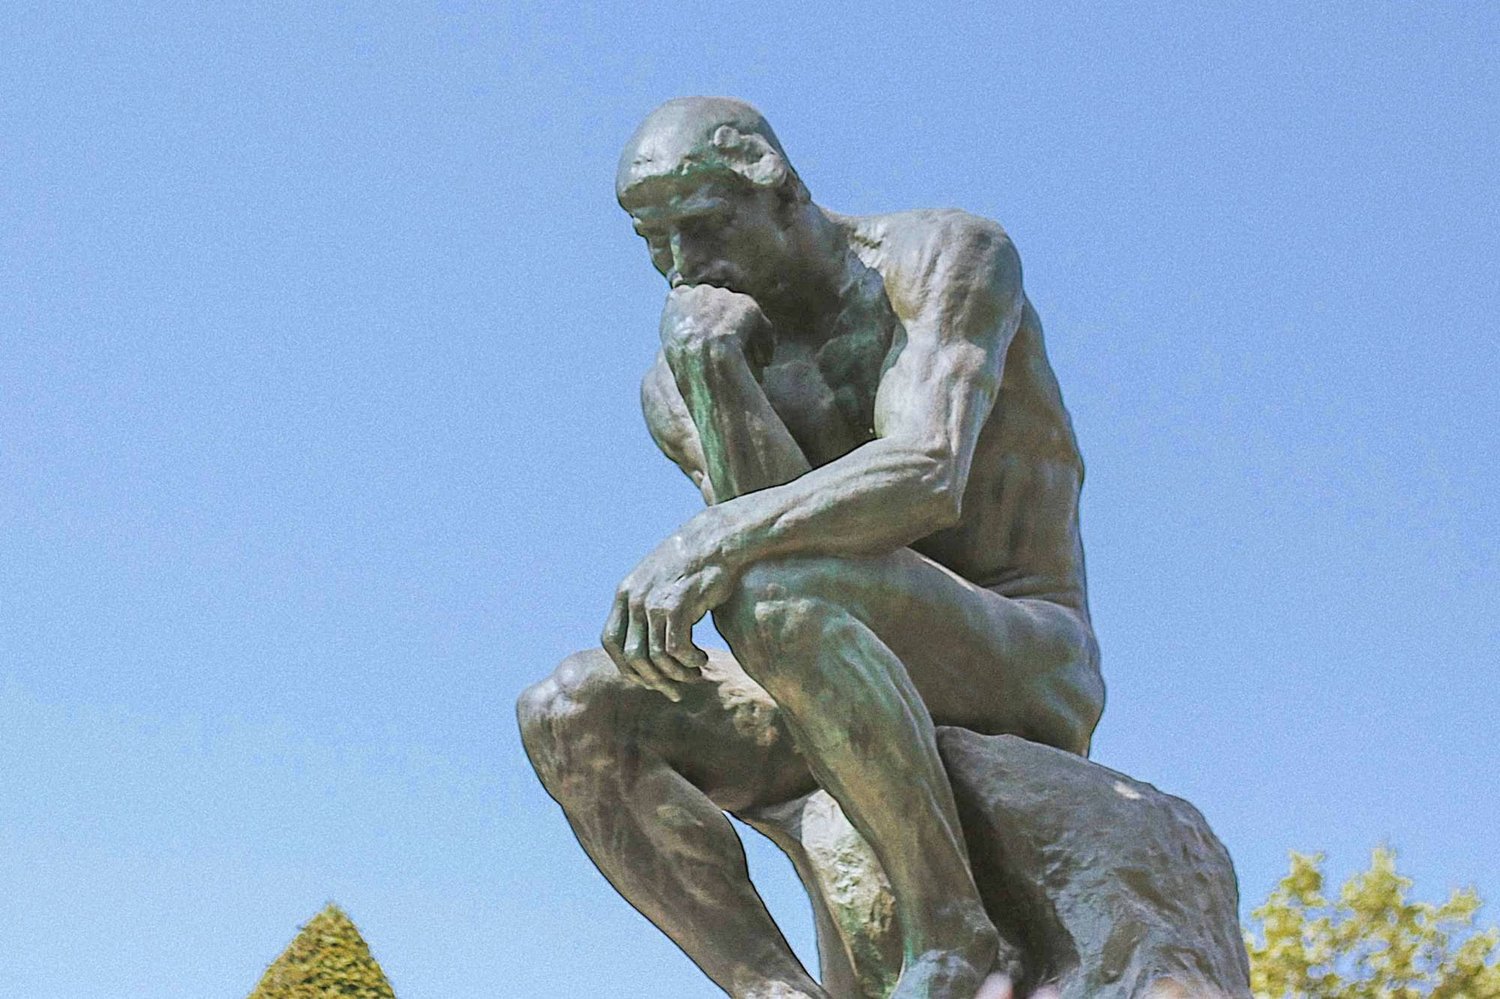 A thought-provoking statue of The Thinker